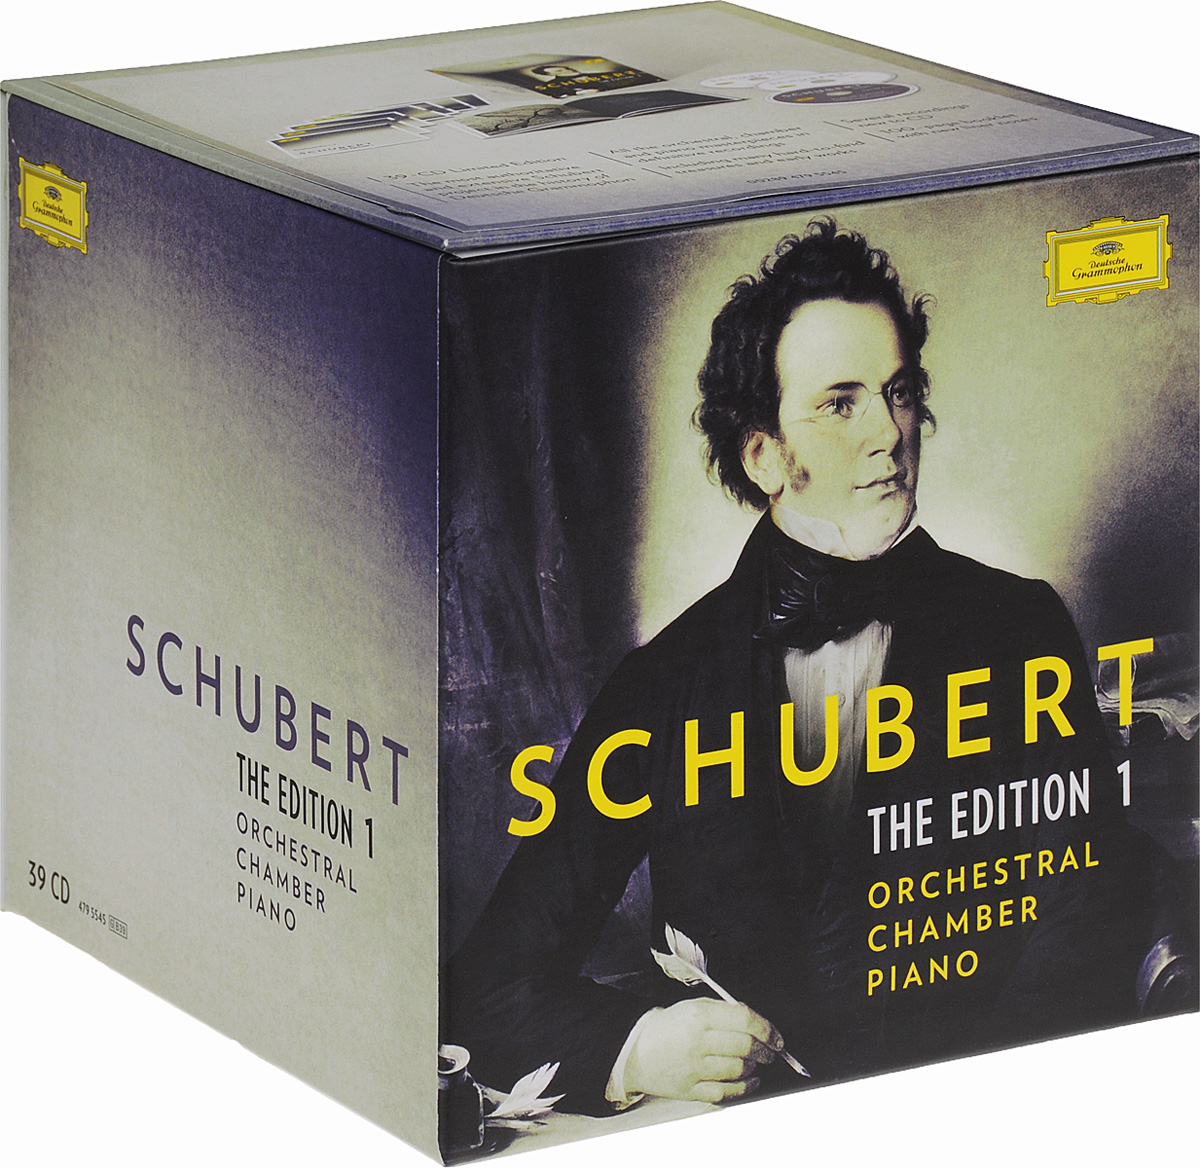 Schubert. The Edition 1. Orchestral. Chamber. Piano. Limited Edition (39 CD)